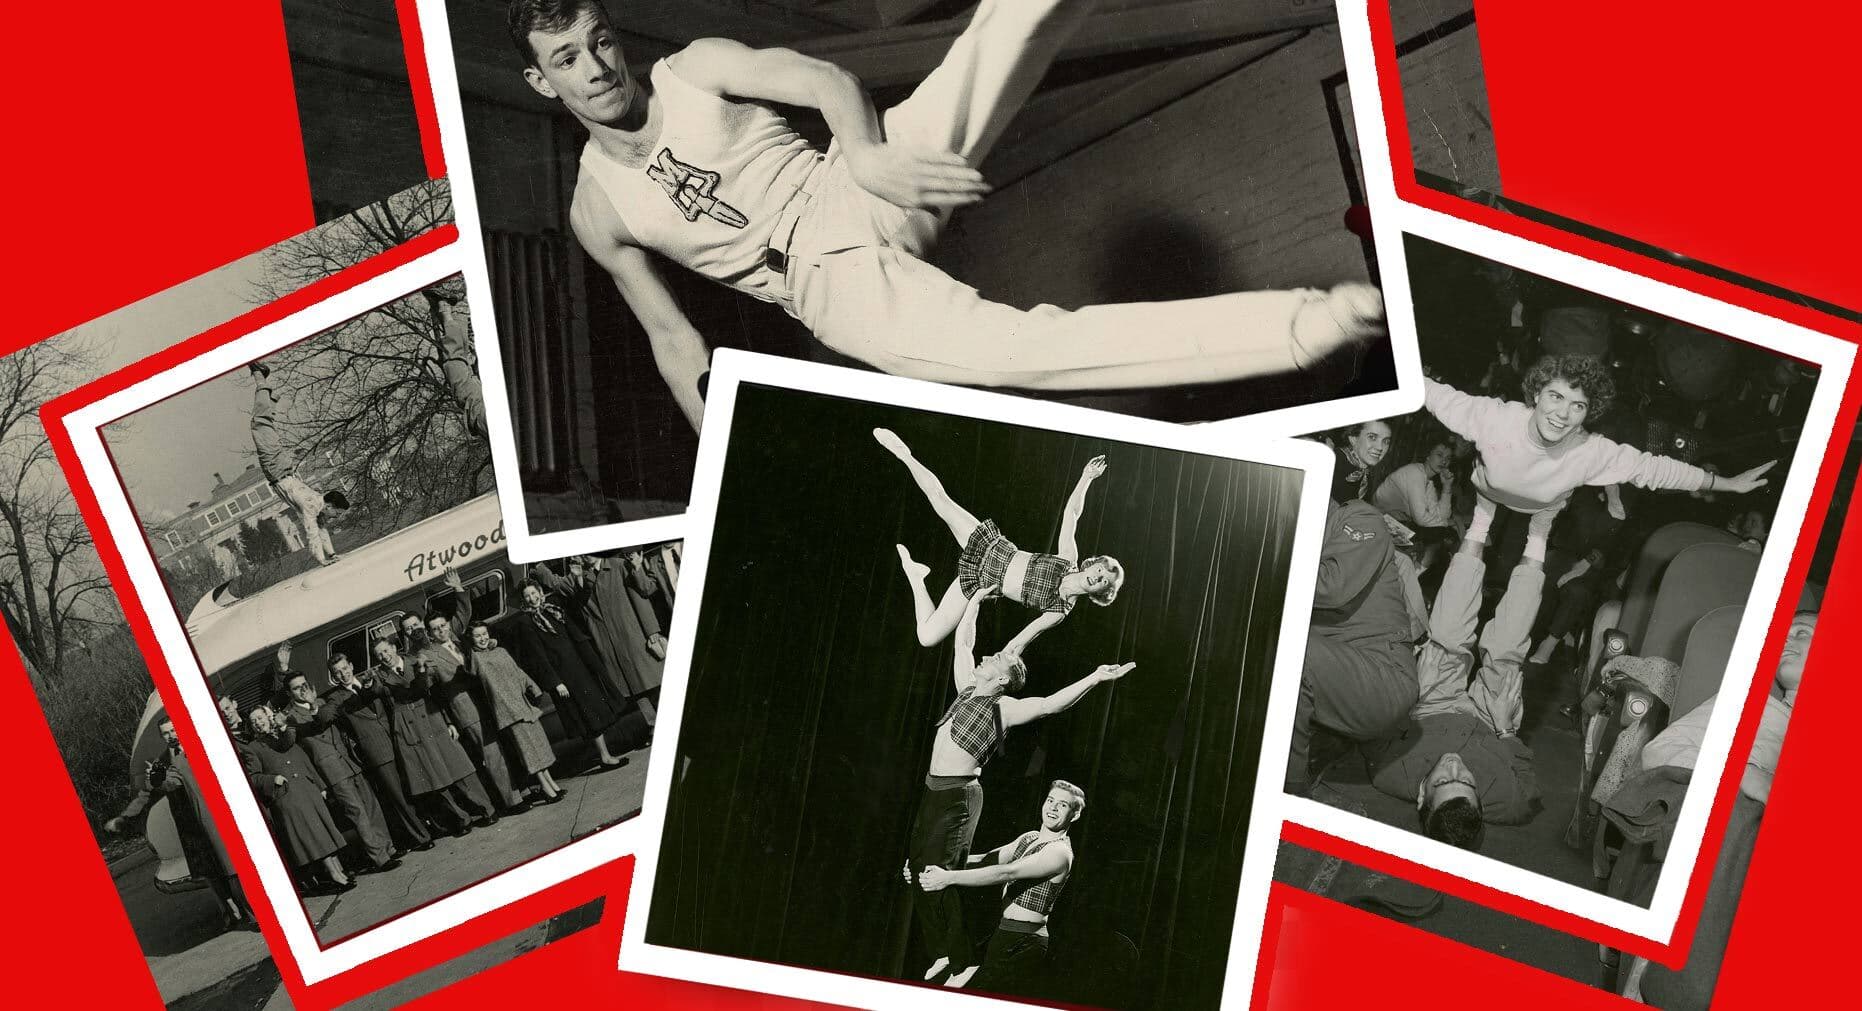 Collage of archival Gymkana images